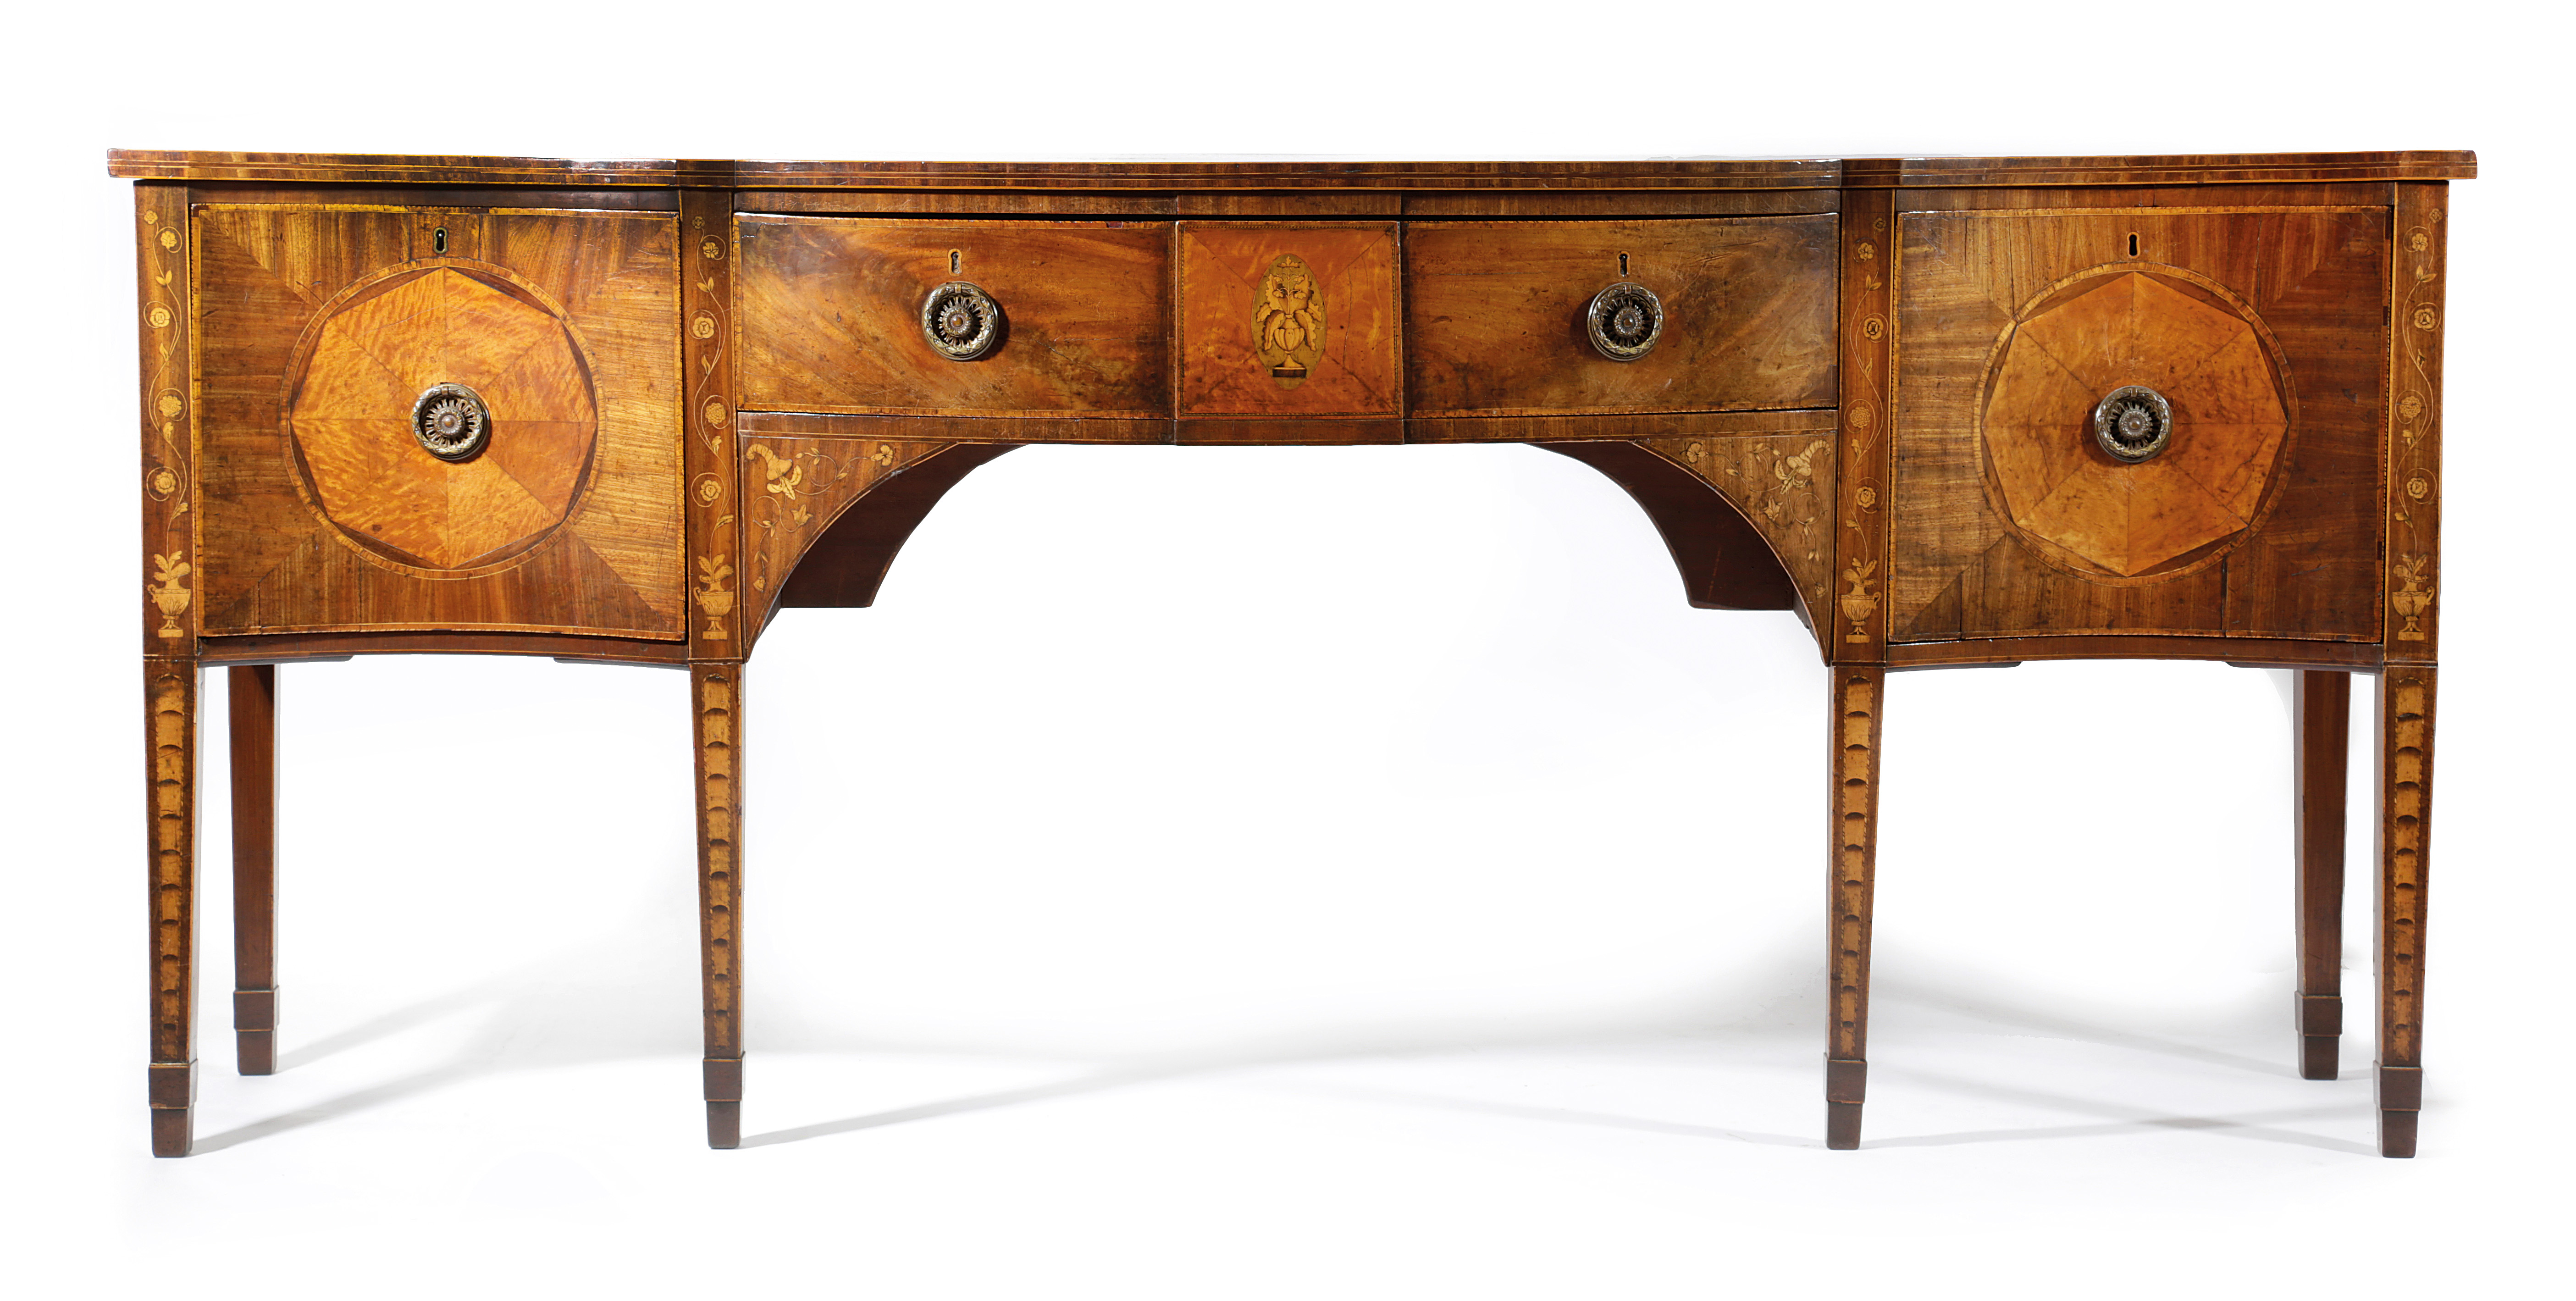 A GEORGE III MAHOGANY AND MARQUETRY SERPENTINE SIDEBOARD PROBABLY IRISH, LATE 18TH CENTURY AND LATER - Image 2 of 3